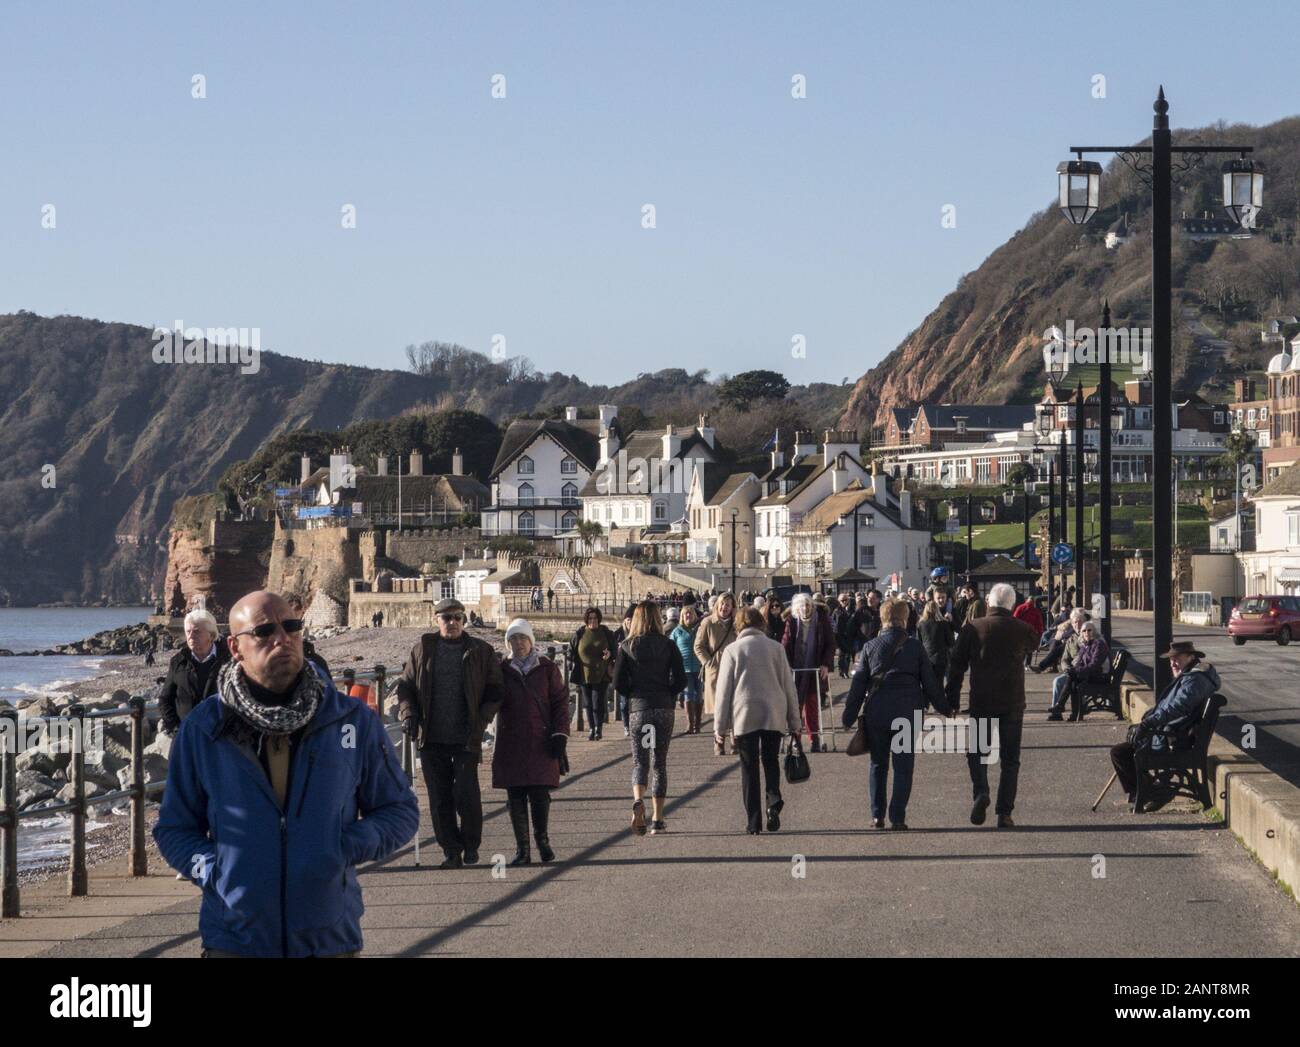 Sidmouth, UK. 19th Jan 2020 People out on Sidmouth Esplanade as extremely high pressure is predicted today by the Met Office.  Readings in the South West to are expected to show 1,050 hectopascals (hPa), a rare high only reached a few times in the last century.This is likely to bring some popping sensation in peoples ears, but the bonus will be fine, clear settled weather for a few days. Photo Central/Alamy Live News Stock Photo